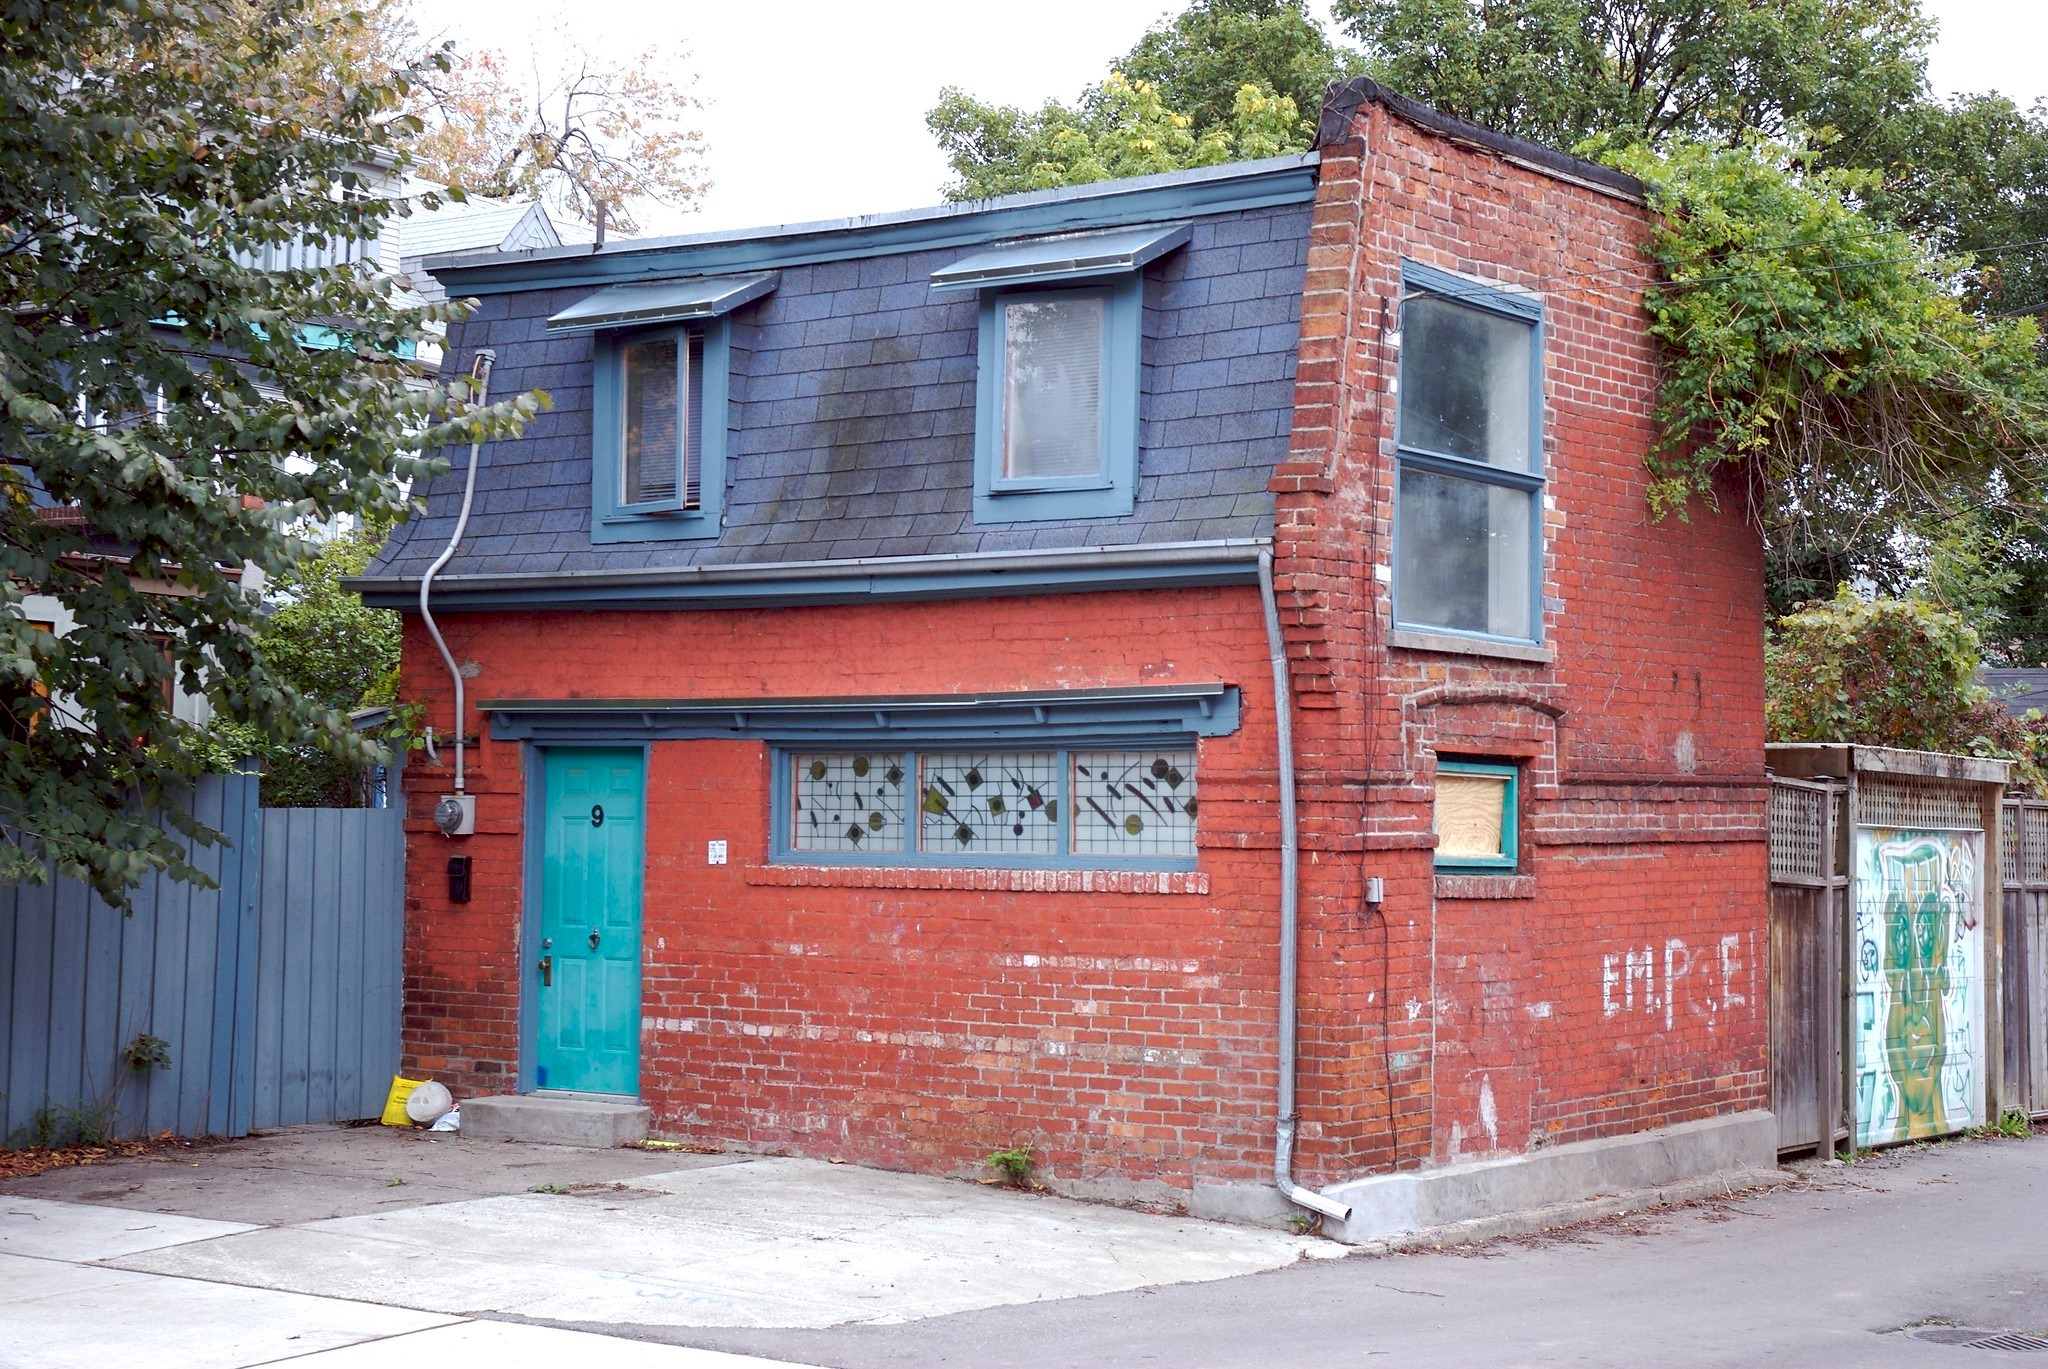 Toronto has a lot of tiny houses scattered around the city on small streets, backyards and lane-ways. This one is at #9 Lobb Avenue between Crawford & Shaw, north of Queen street west, 1990s